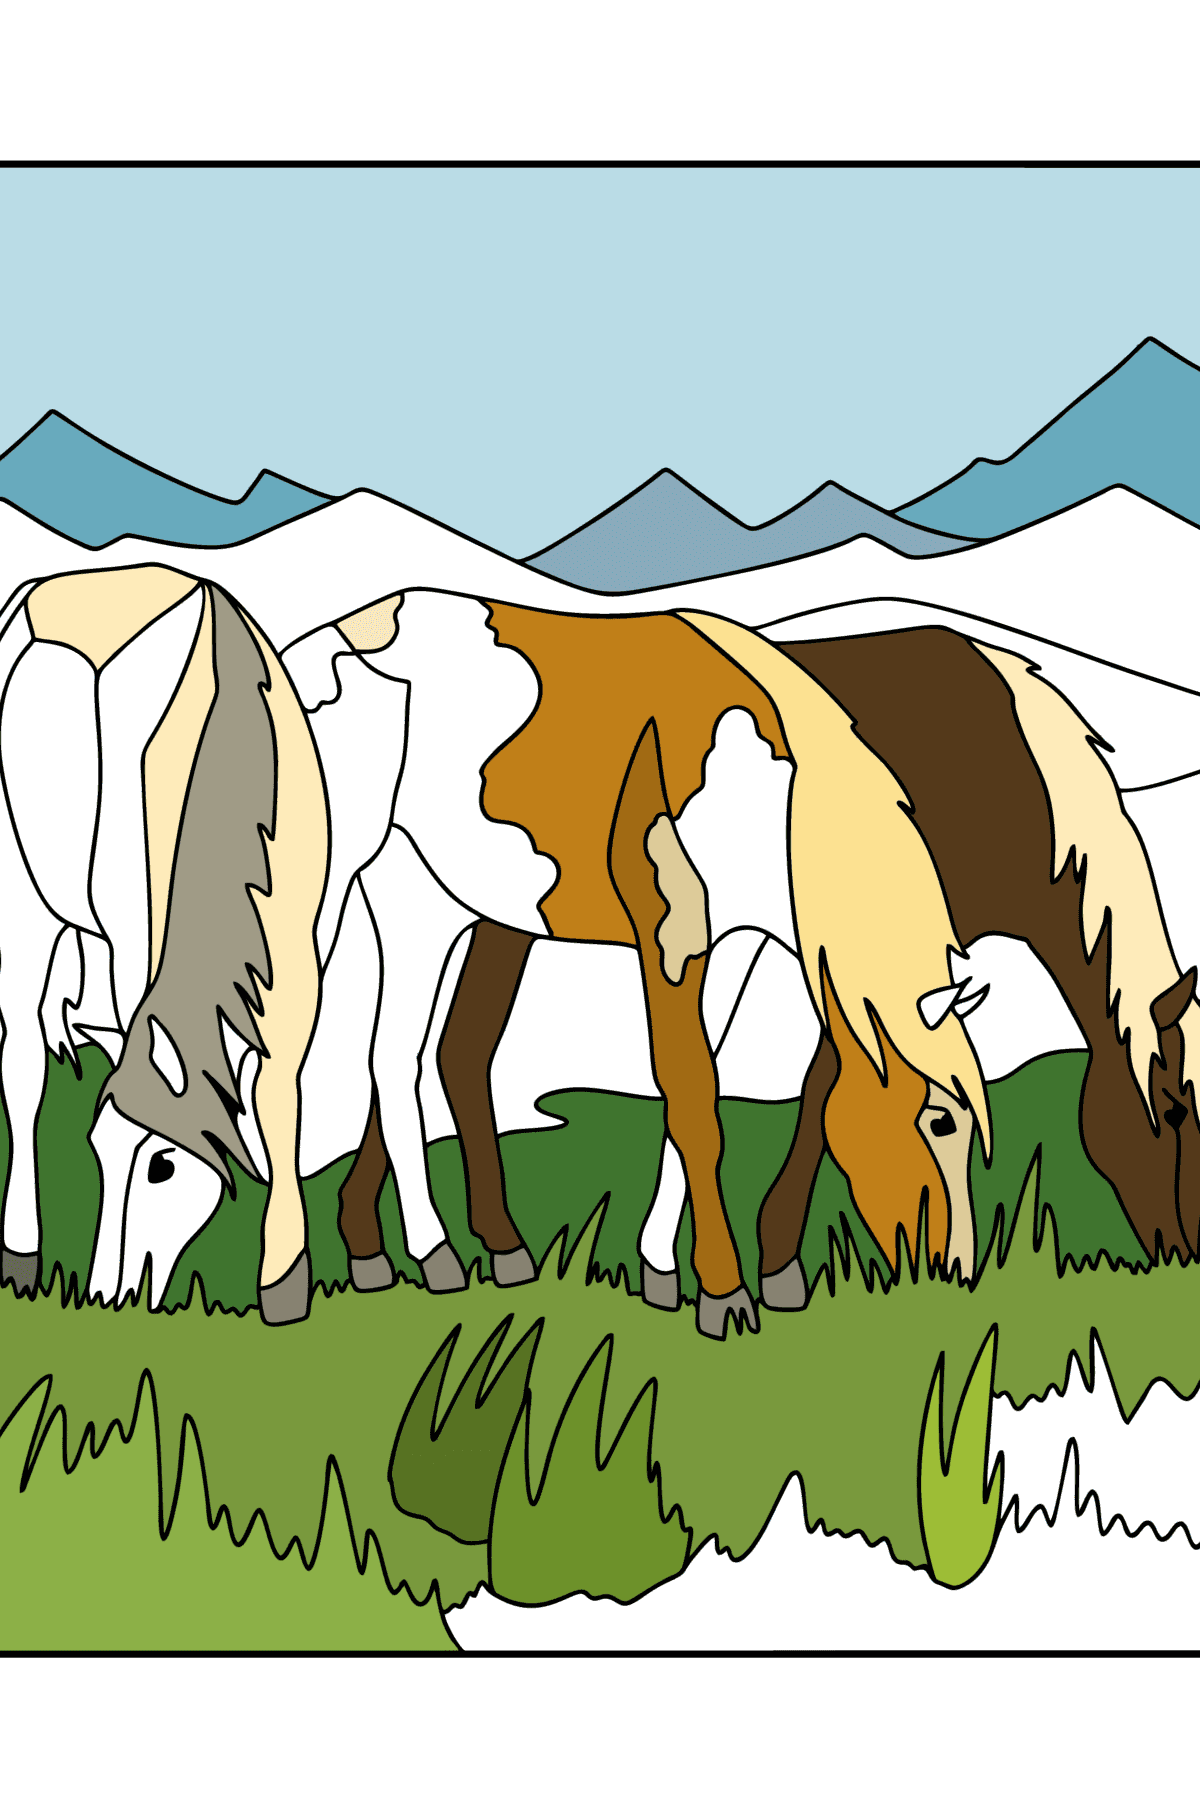 Horses graze сoloring page - Coloring Pages for Kids